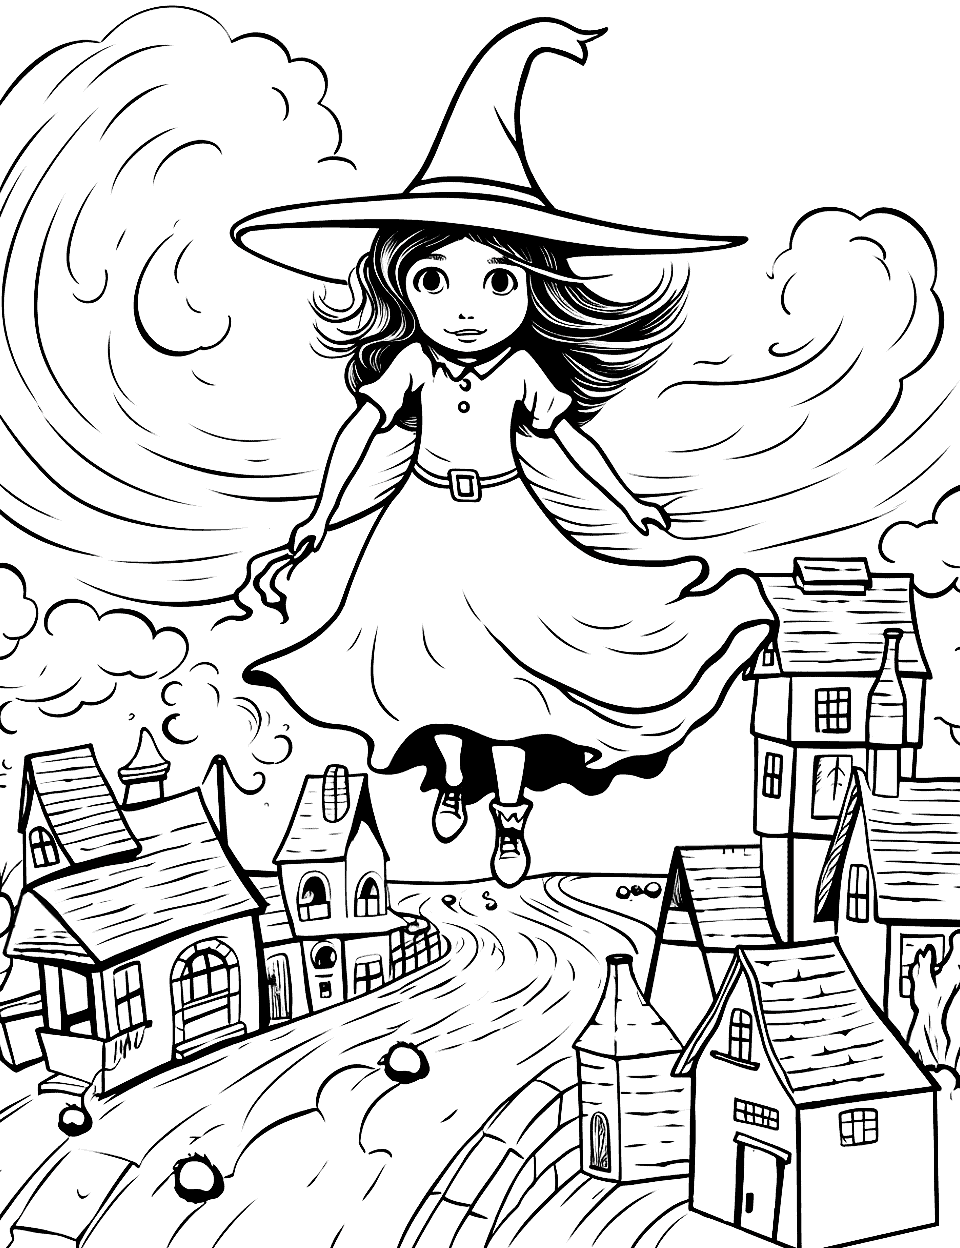 Witch over the Village Coloring Page - A witch flying over a simple village landscape.